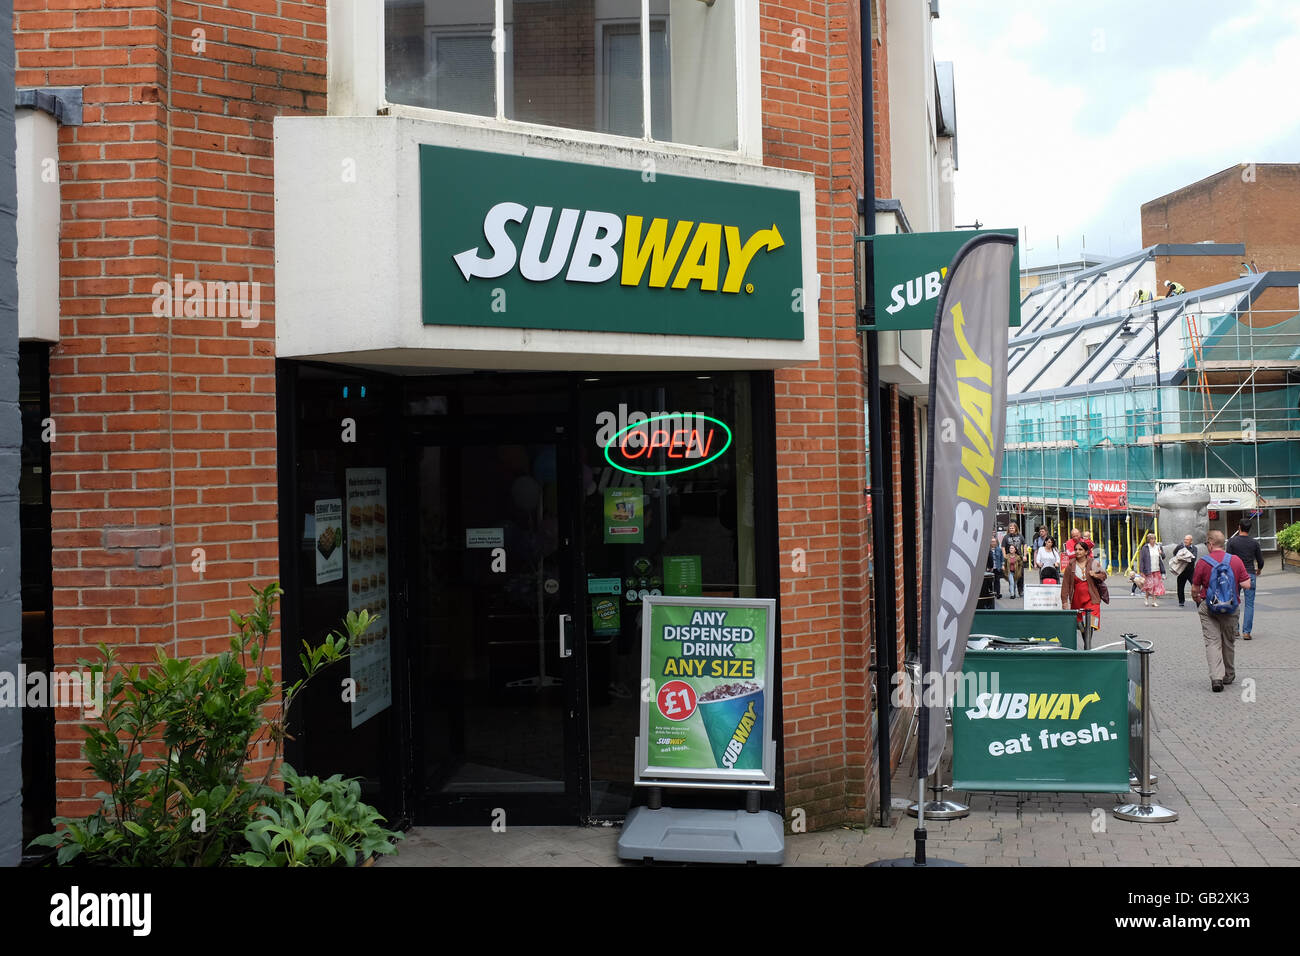 A Subway food restaurant in the U.K. Stock Photo